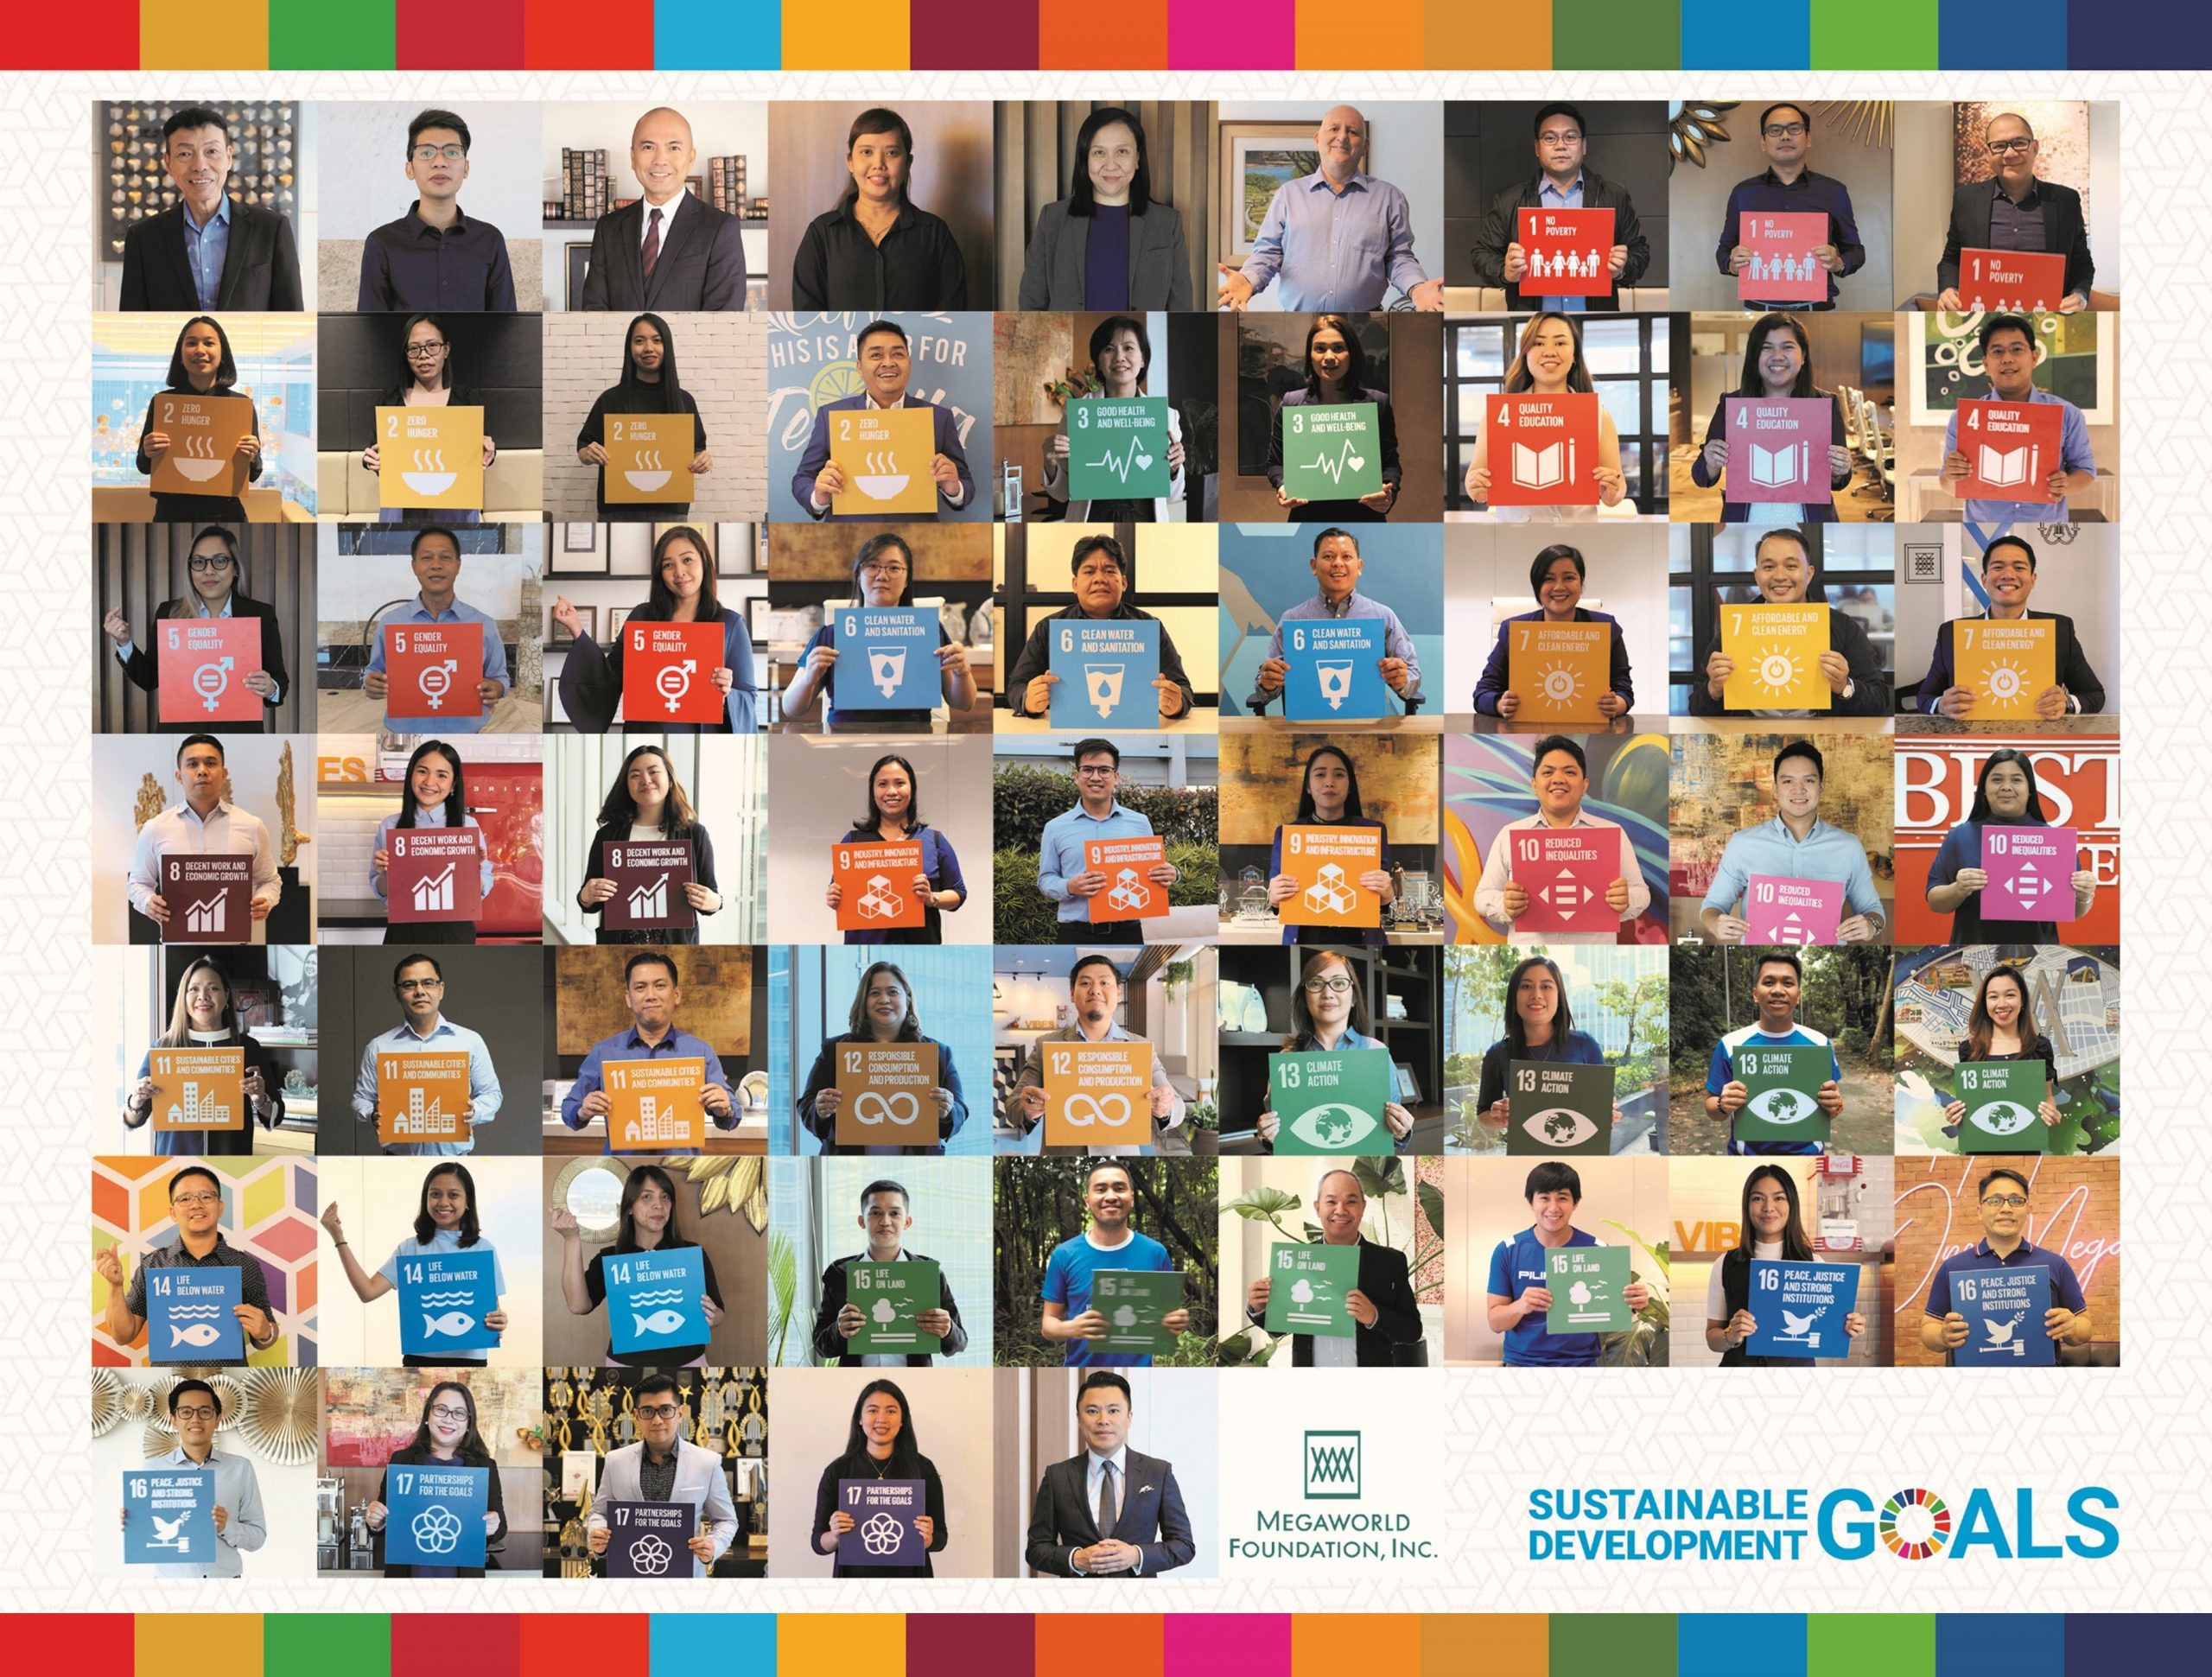 Megaworld Takes a Stand for the United Nations Sustainable Development Goals - Logo - https://s39939.pcdn.co/wp-content/uploads/2020/08/Video_Megaworld-Foundation-scaled.jpg